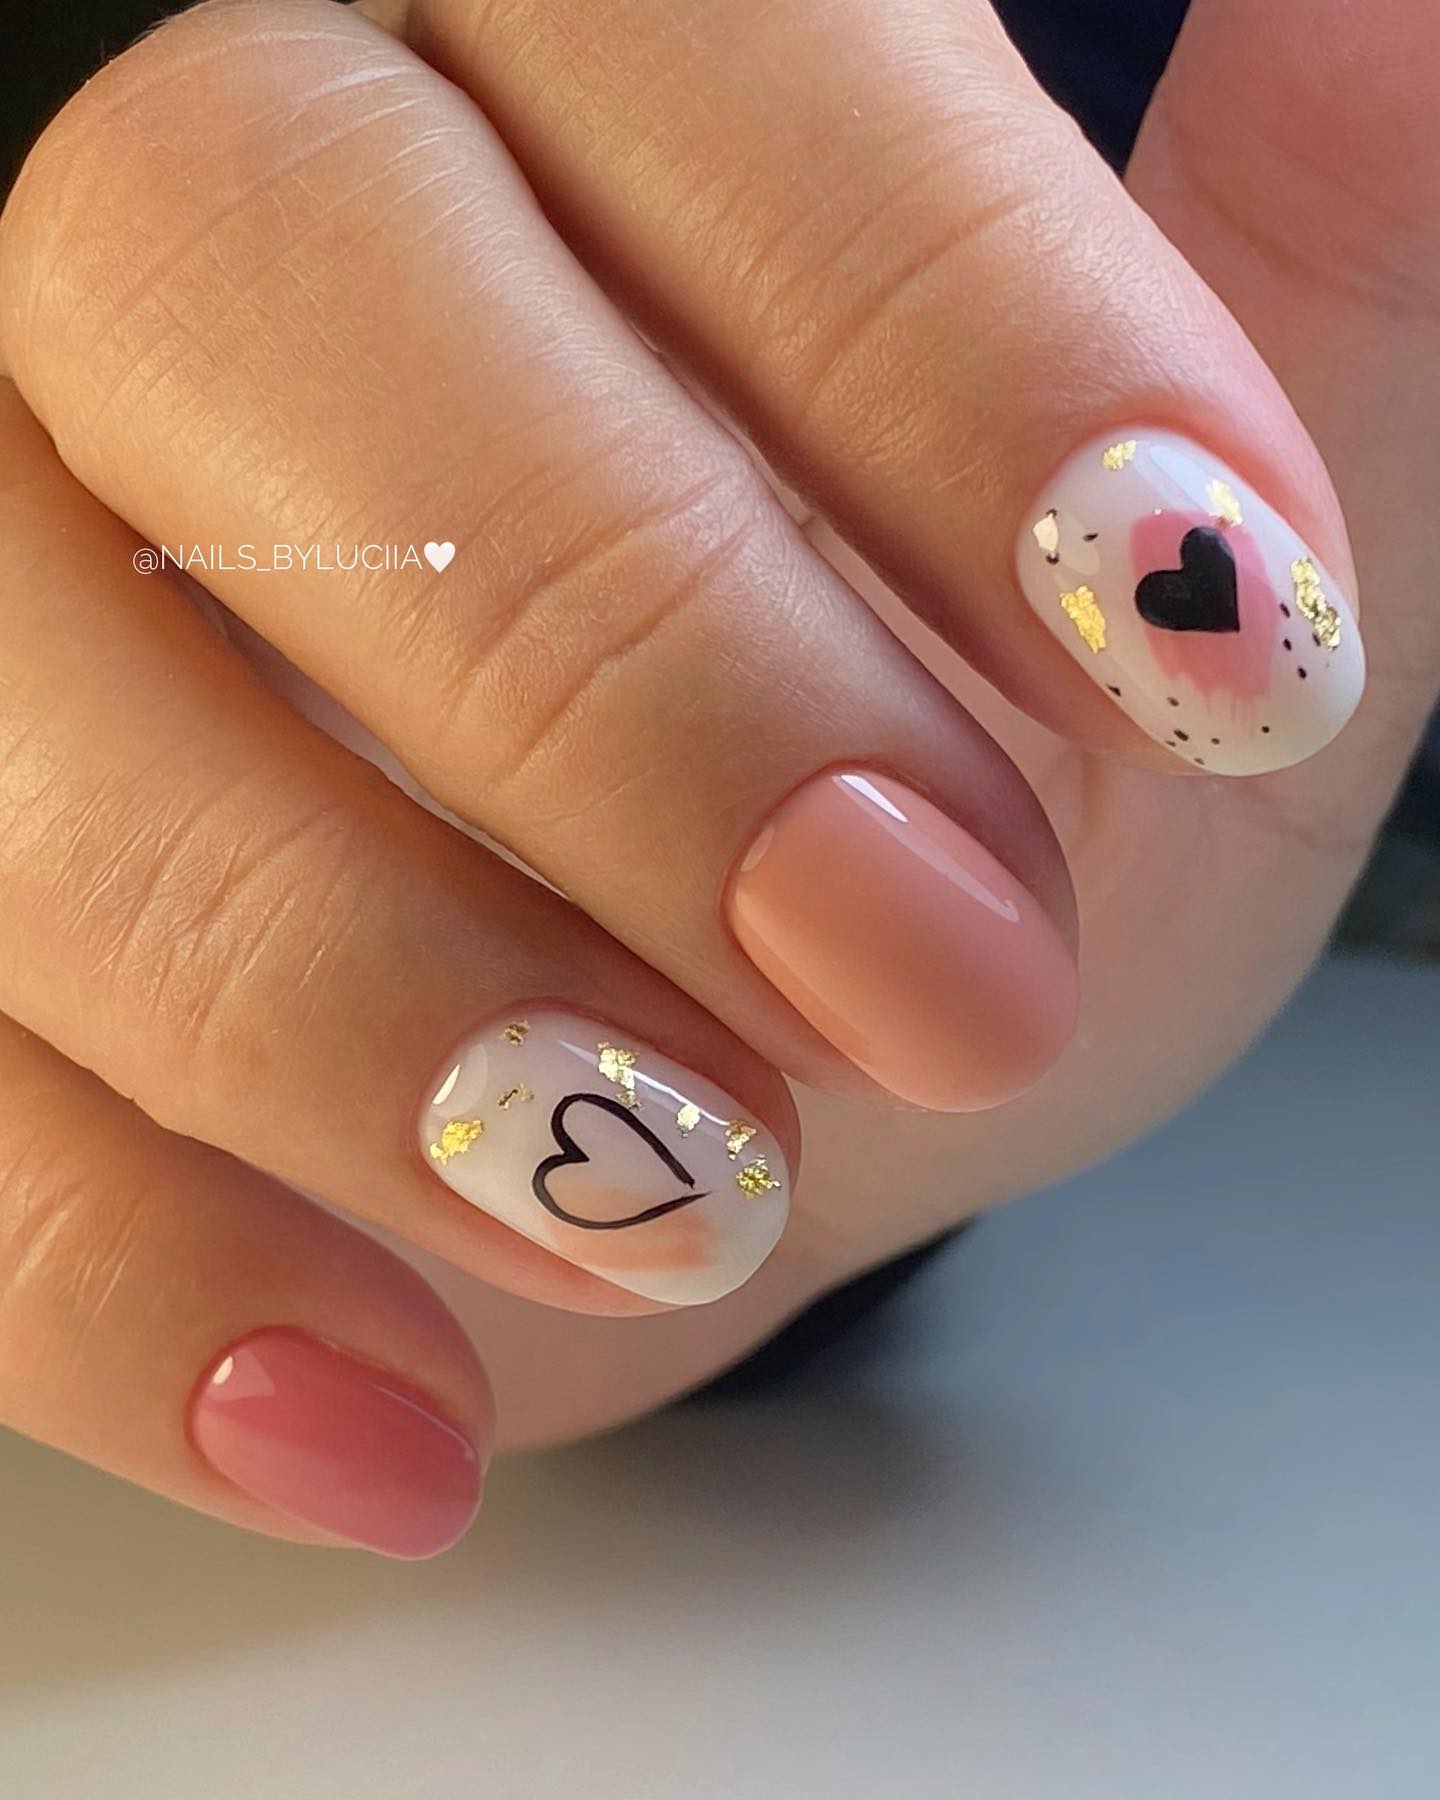 100+ Short Nail Designs You’ll Want To Try This Year images 75